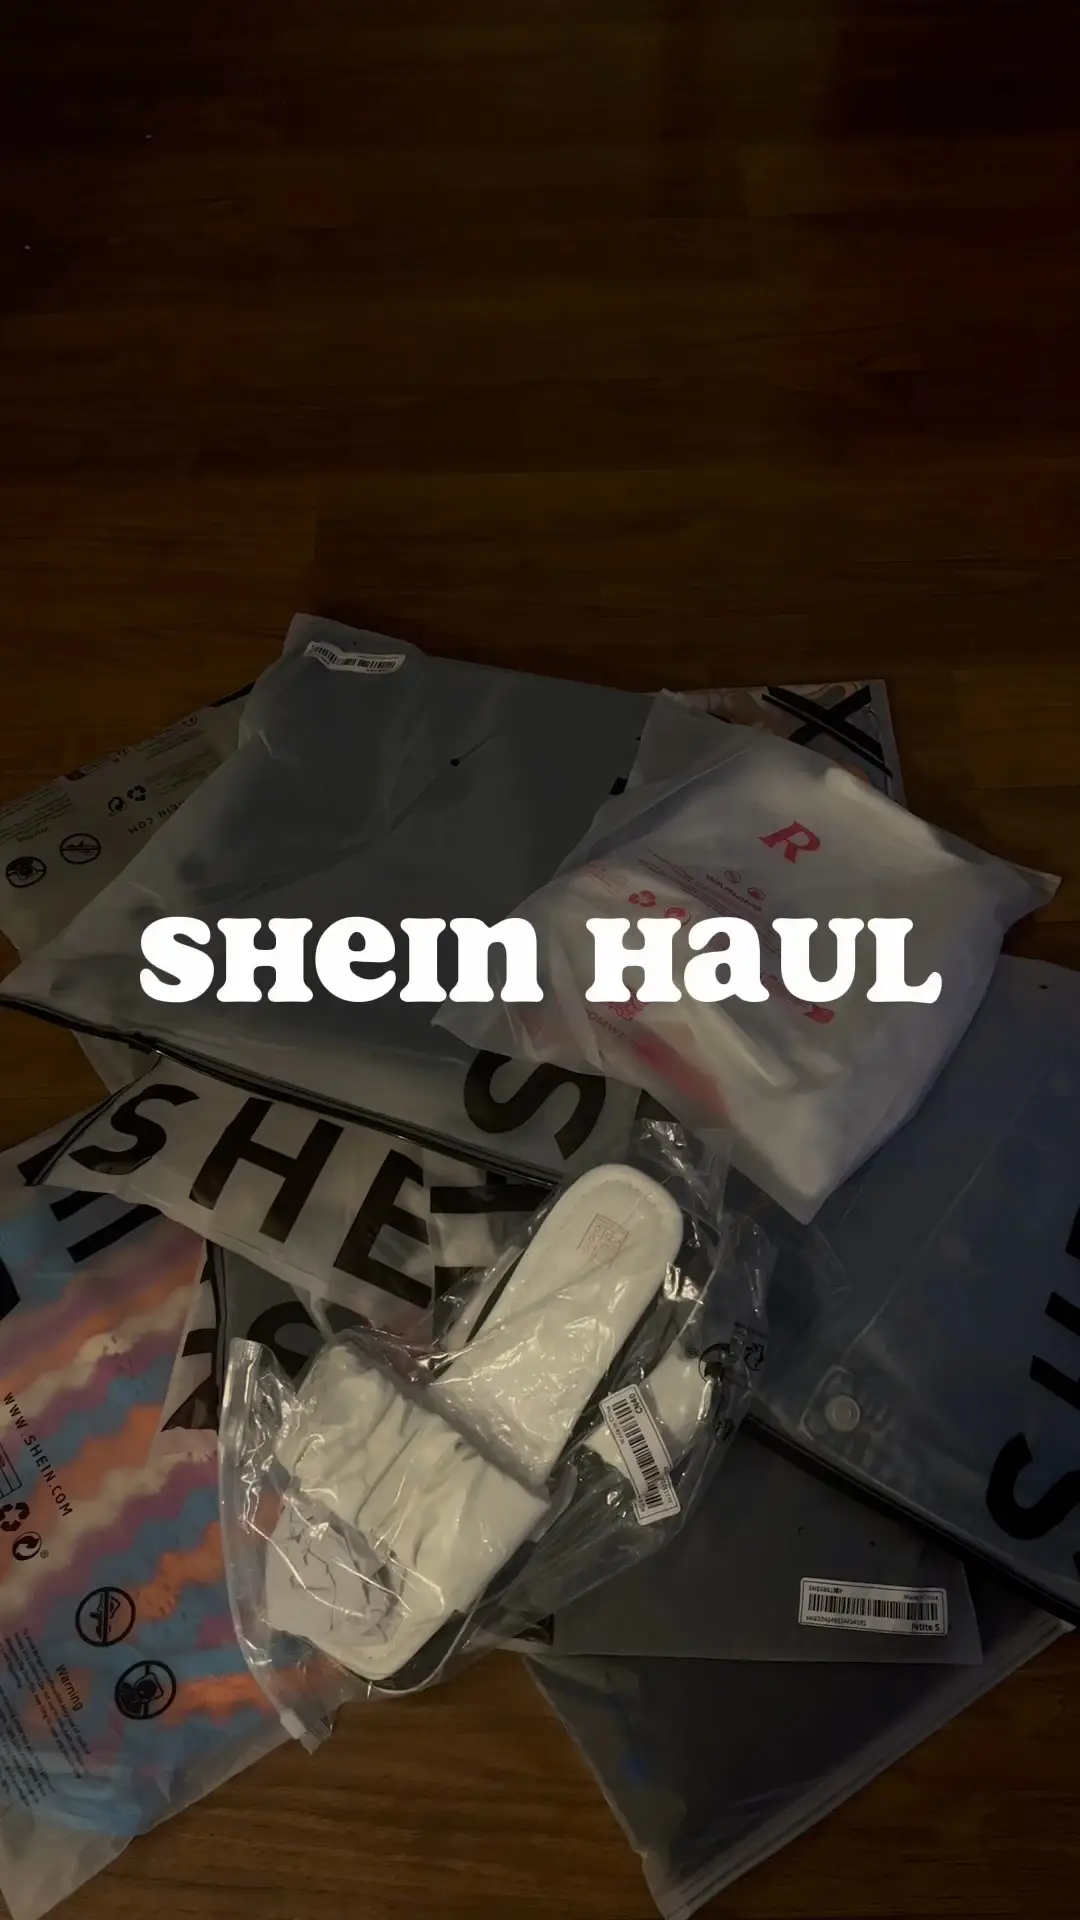 SHEIN bags, what are they made of? : r/plastic